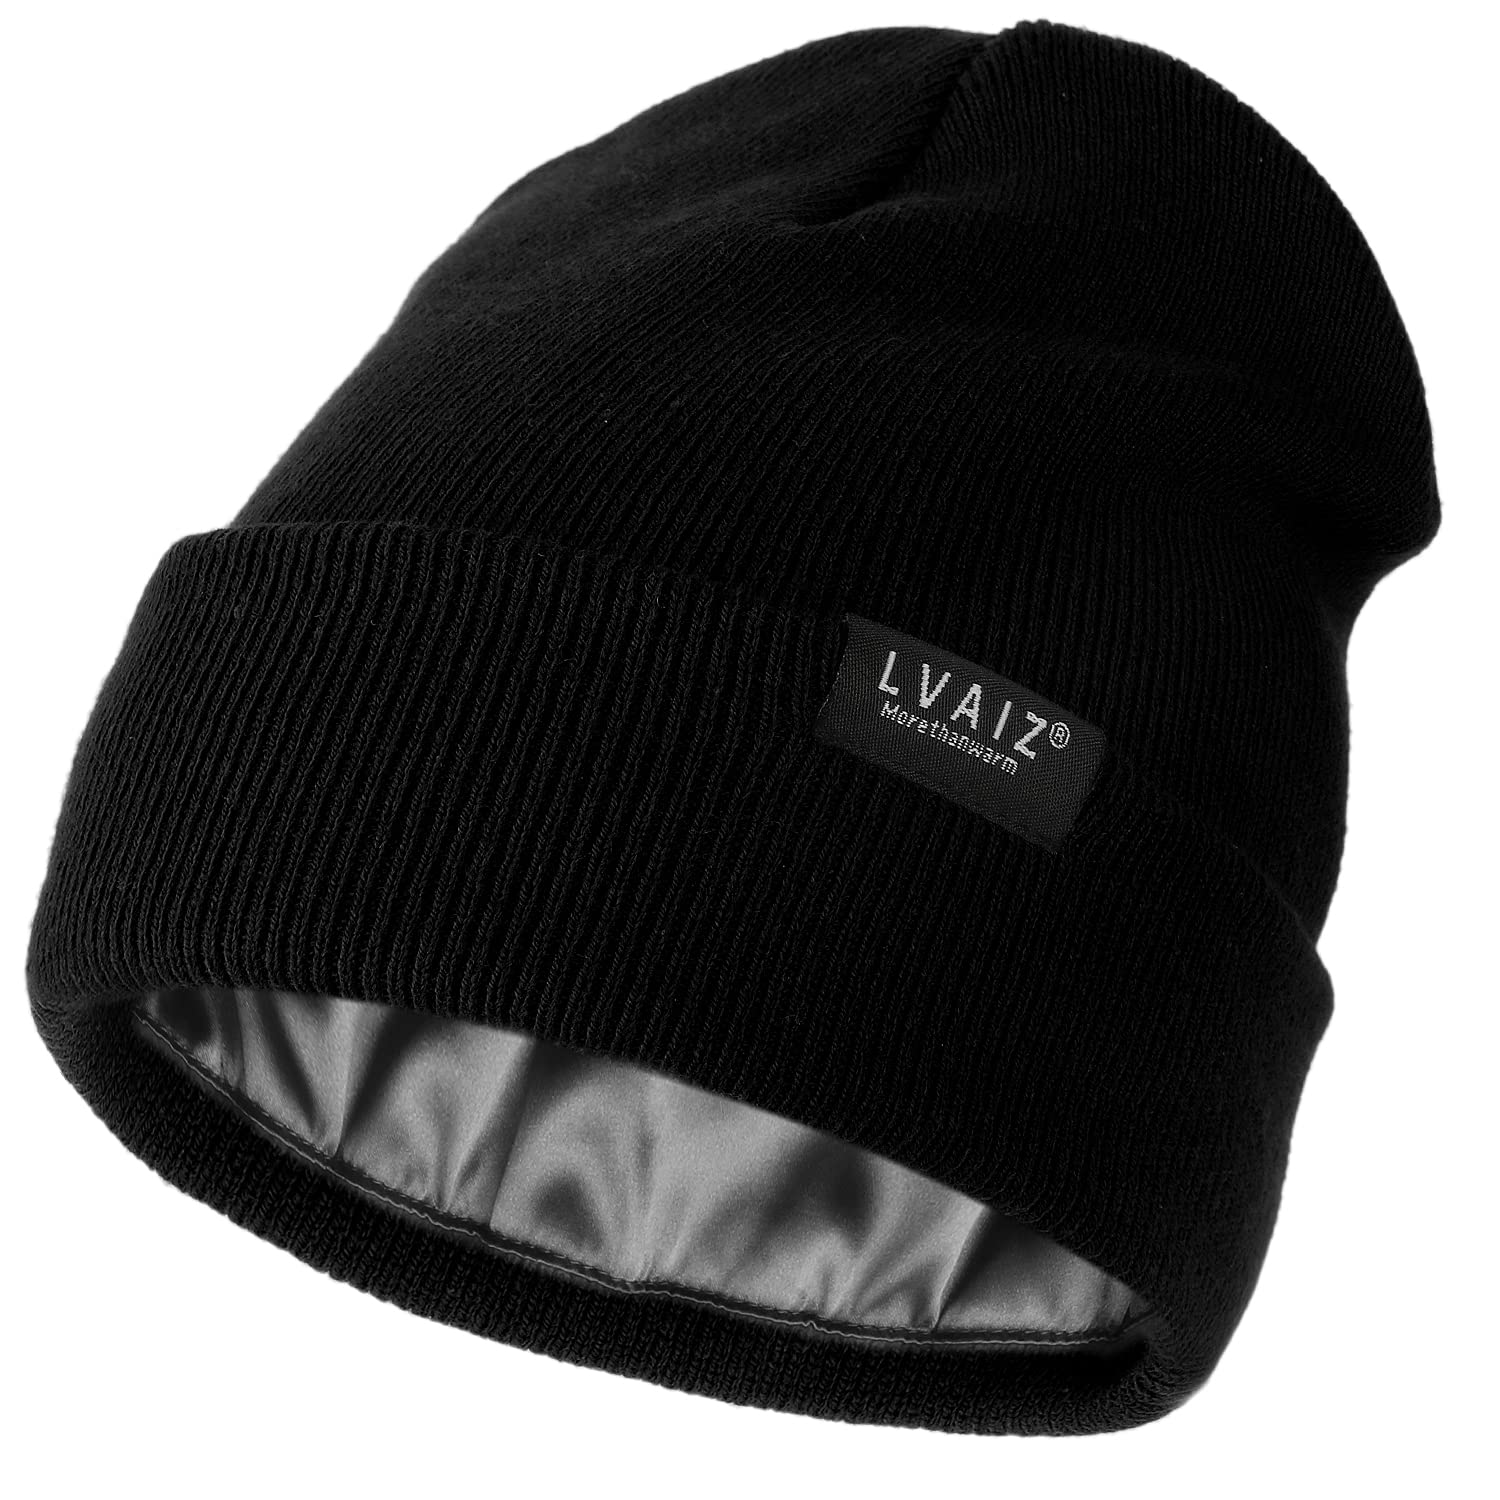 Satin Lined Winter Beanie Hats